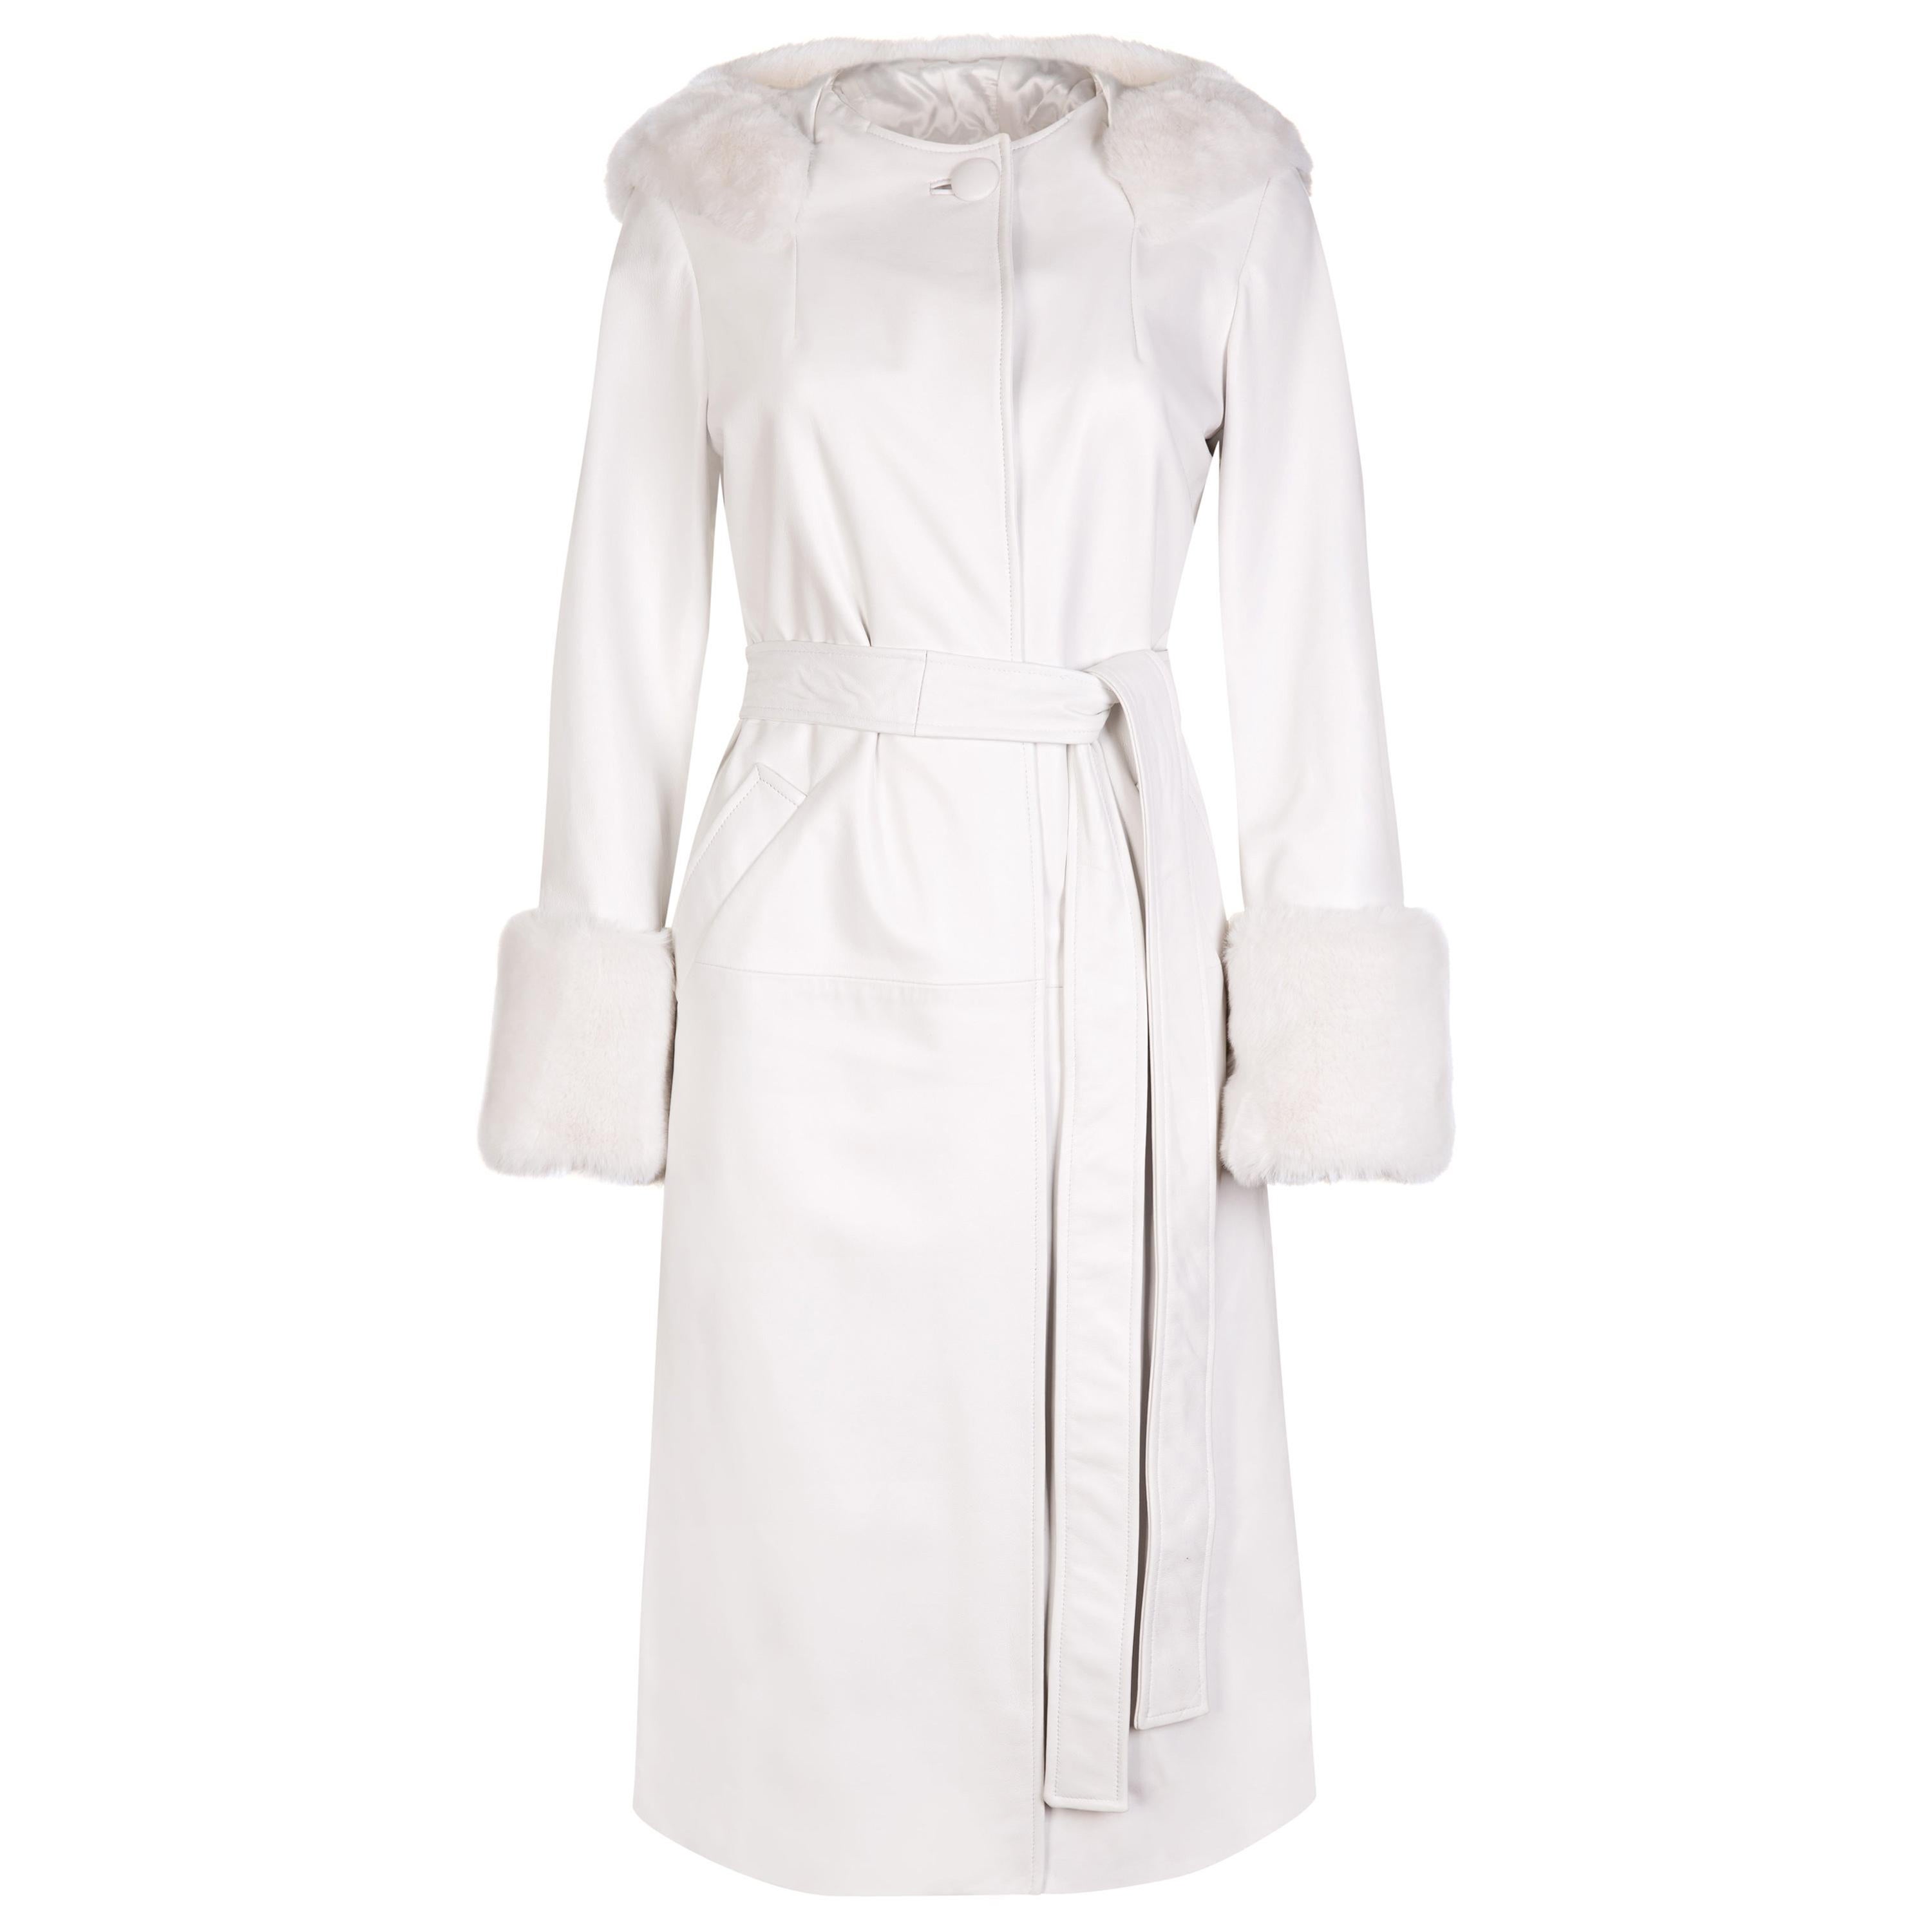 Verheyen Aurora Hooded Leather Trench Coat in White with Faux Fur - Size uk 12  For Sale